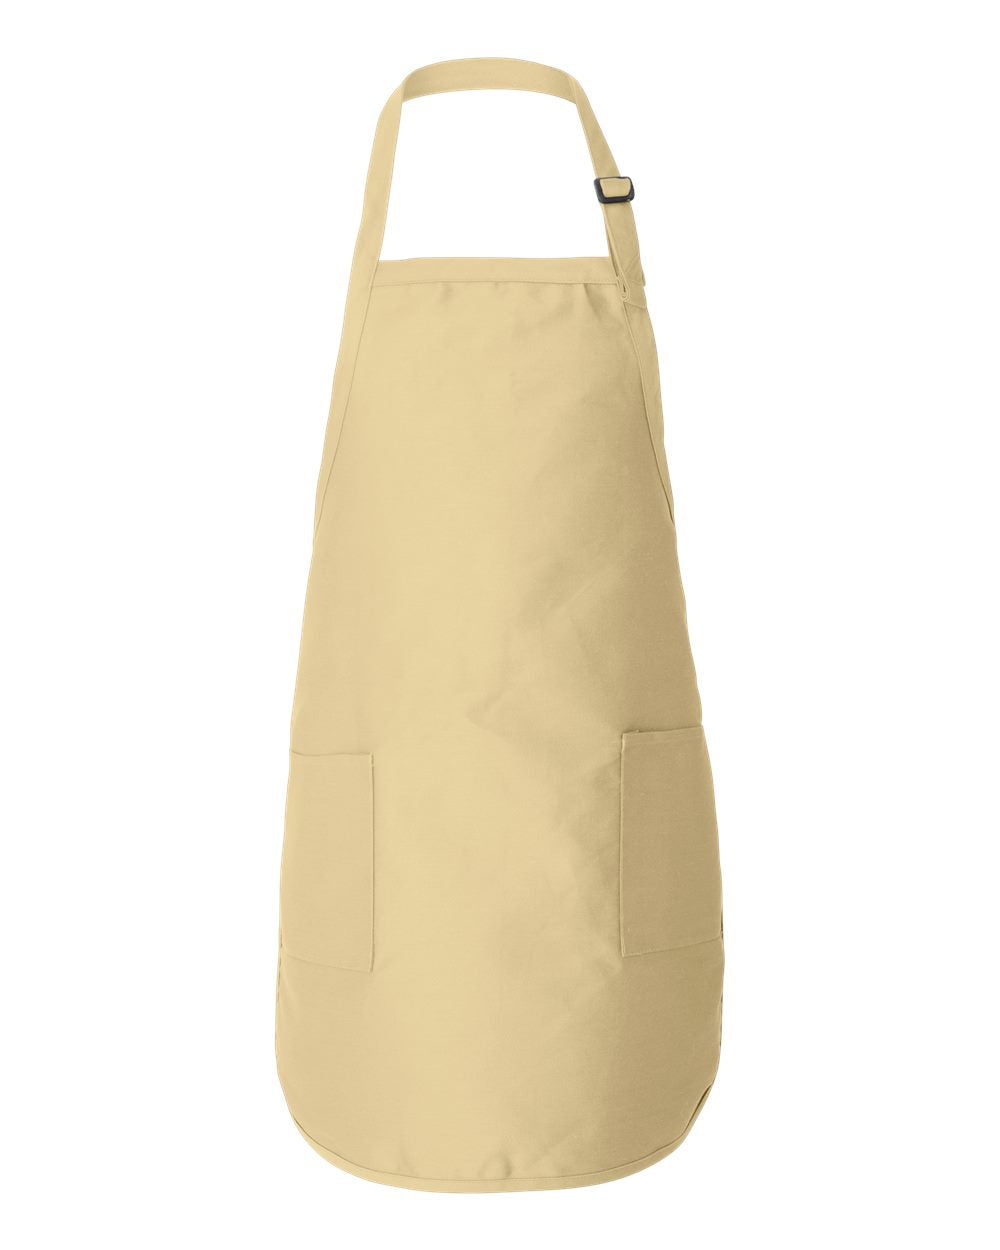 Full-Length Apron with Pockets-Get Me Bedazzled